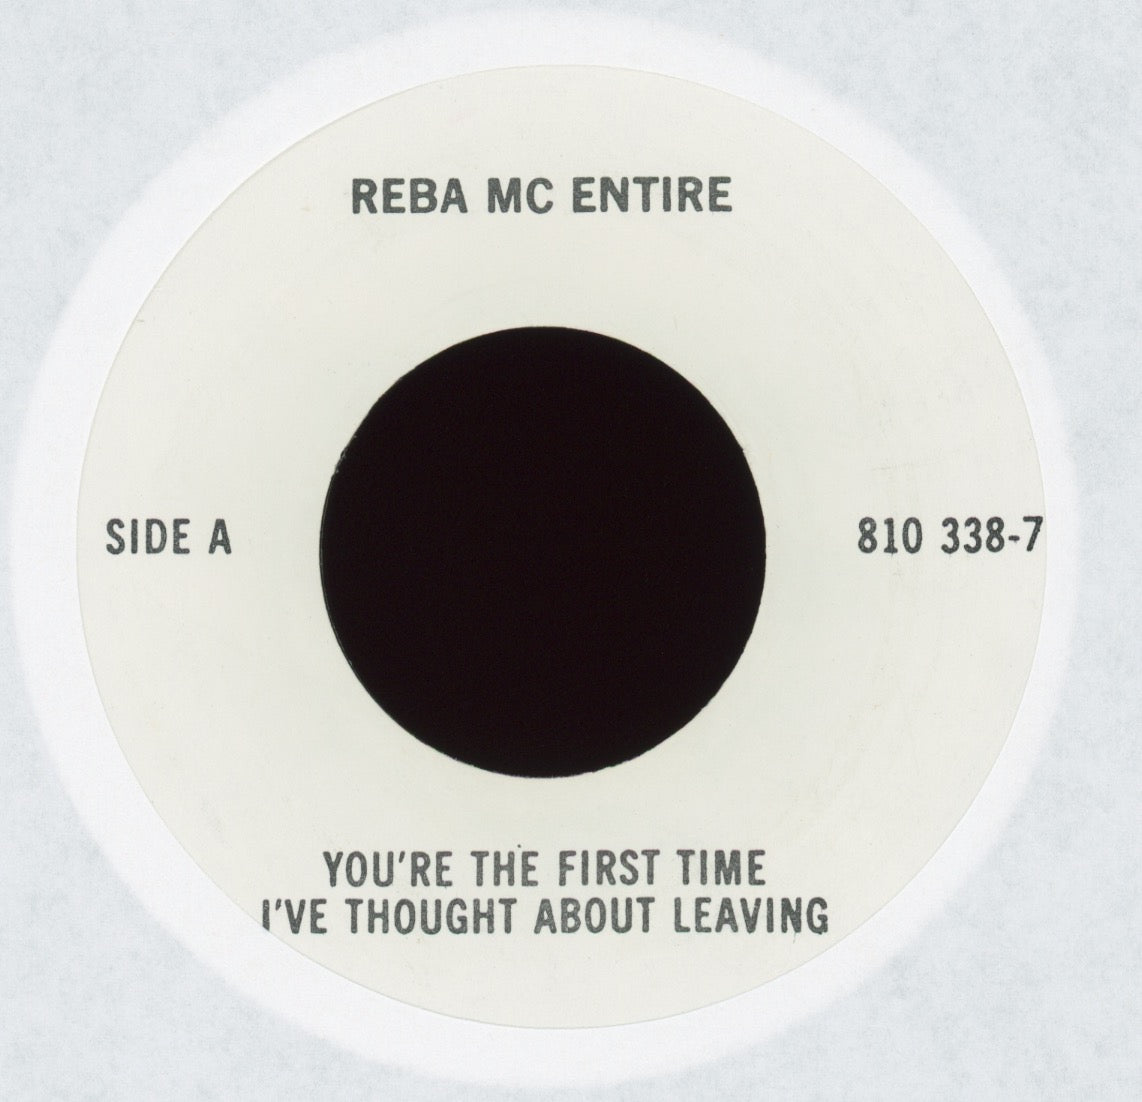 Reba McEntire - You're The First Time I've Thought About Leaving Test Pressing